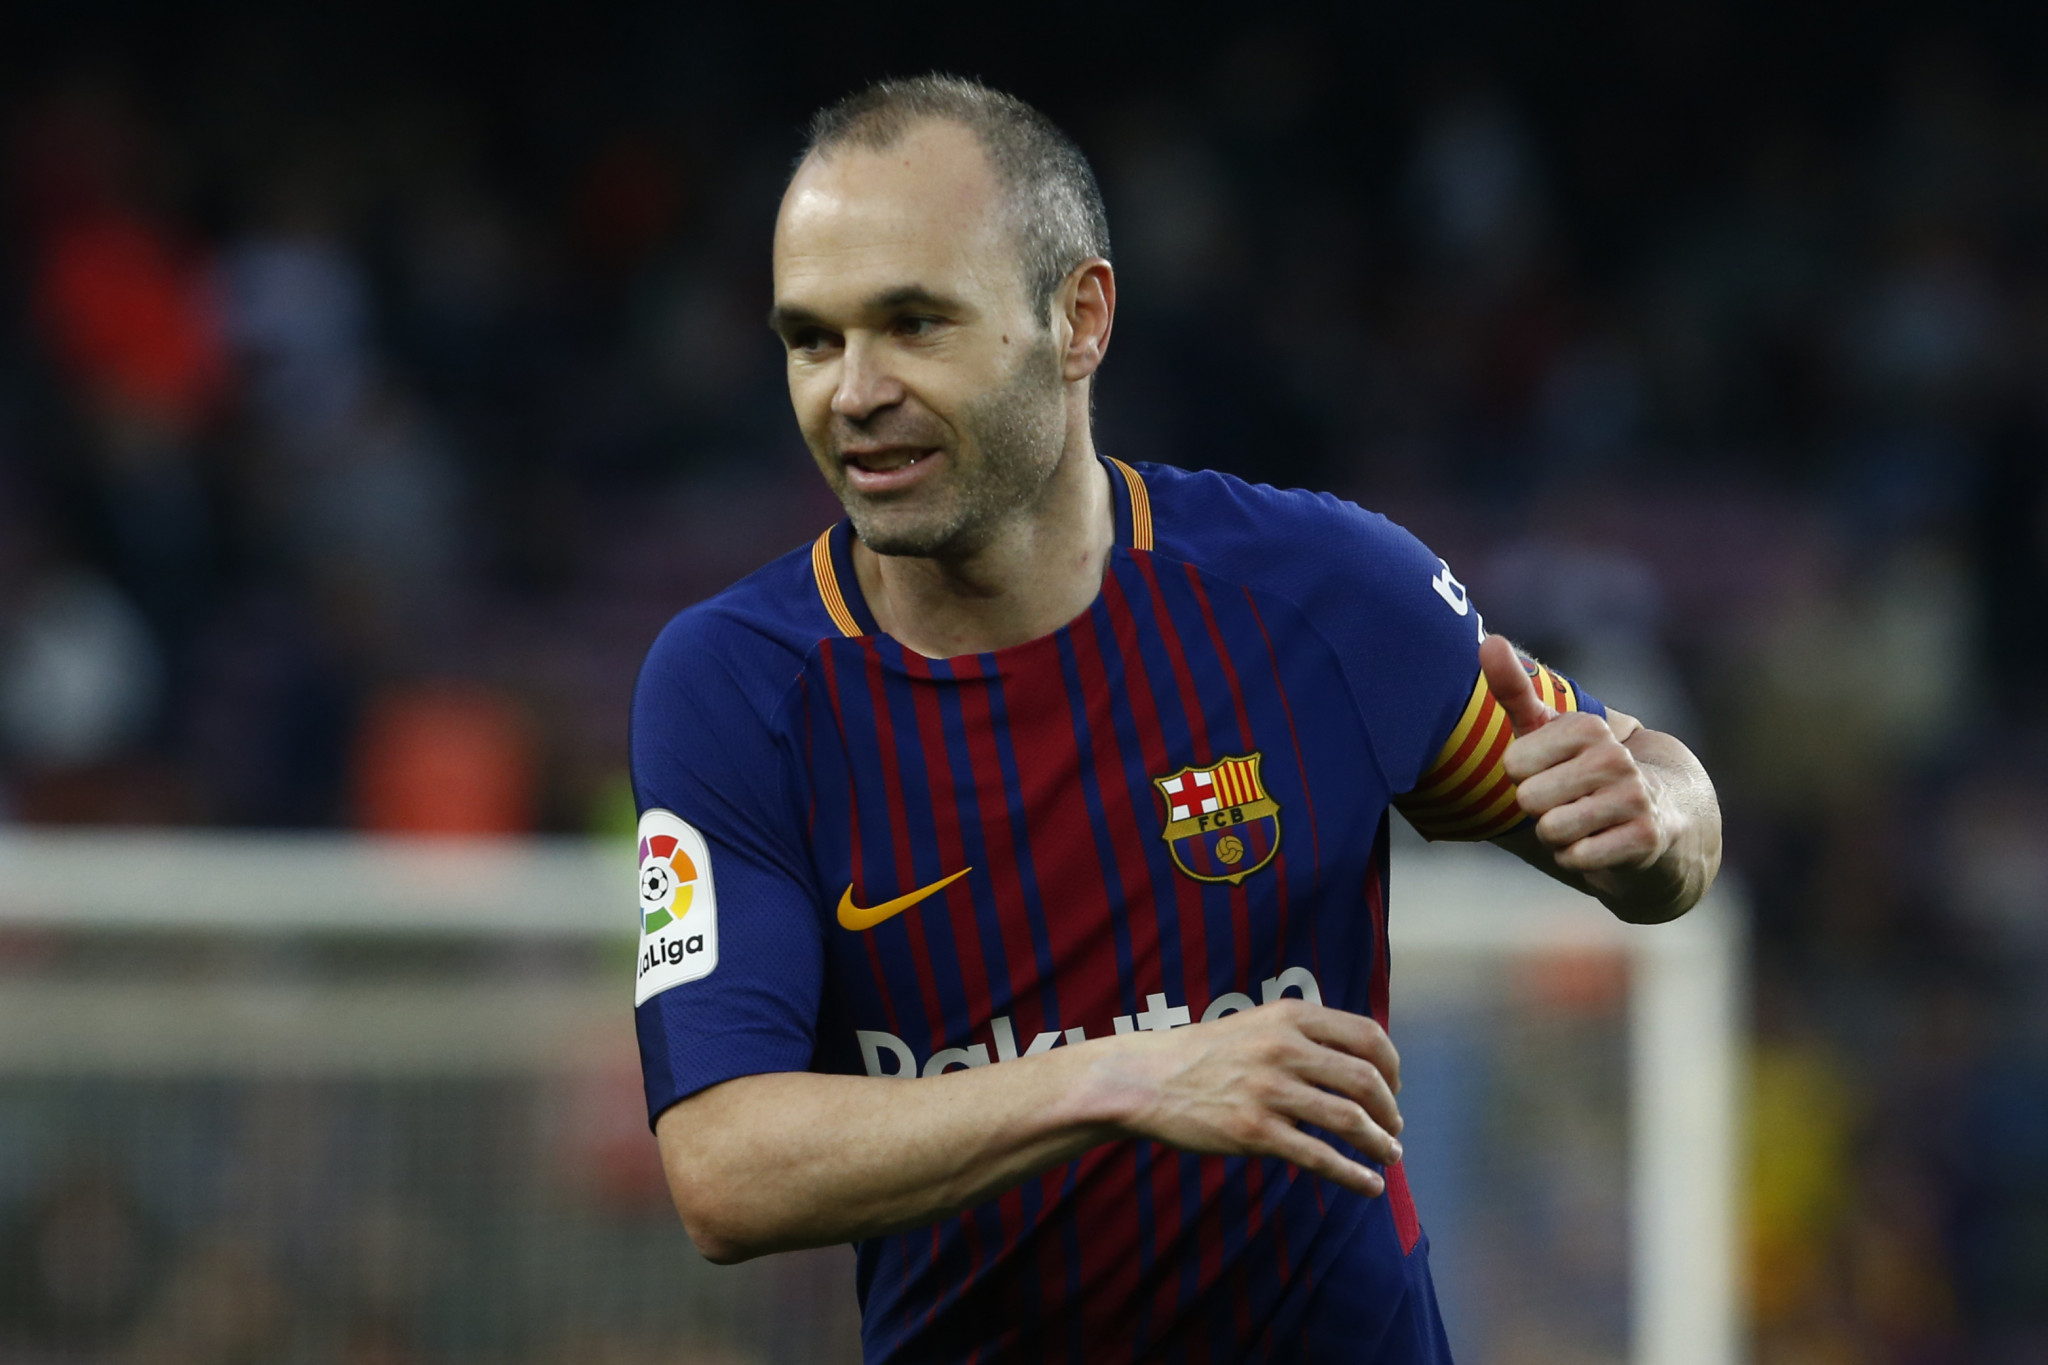 Barcelona star Andres Iniesta has expressed his support for Morocco's bid for the 2026 FIFA World Cup ©Getty Images